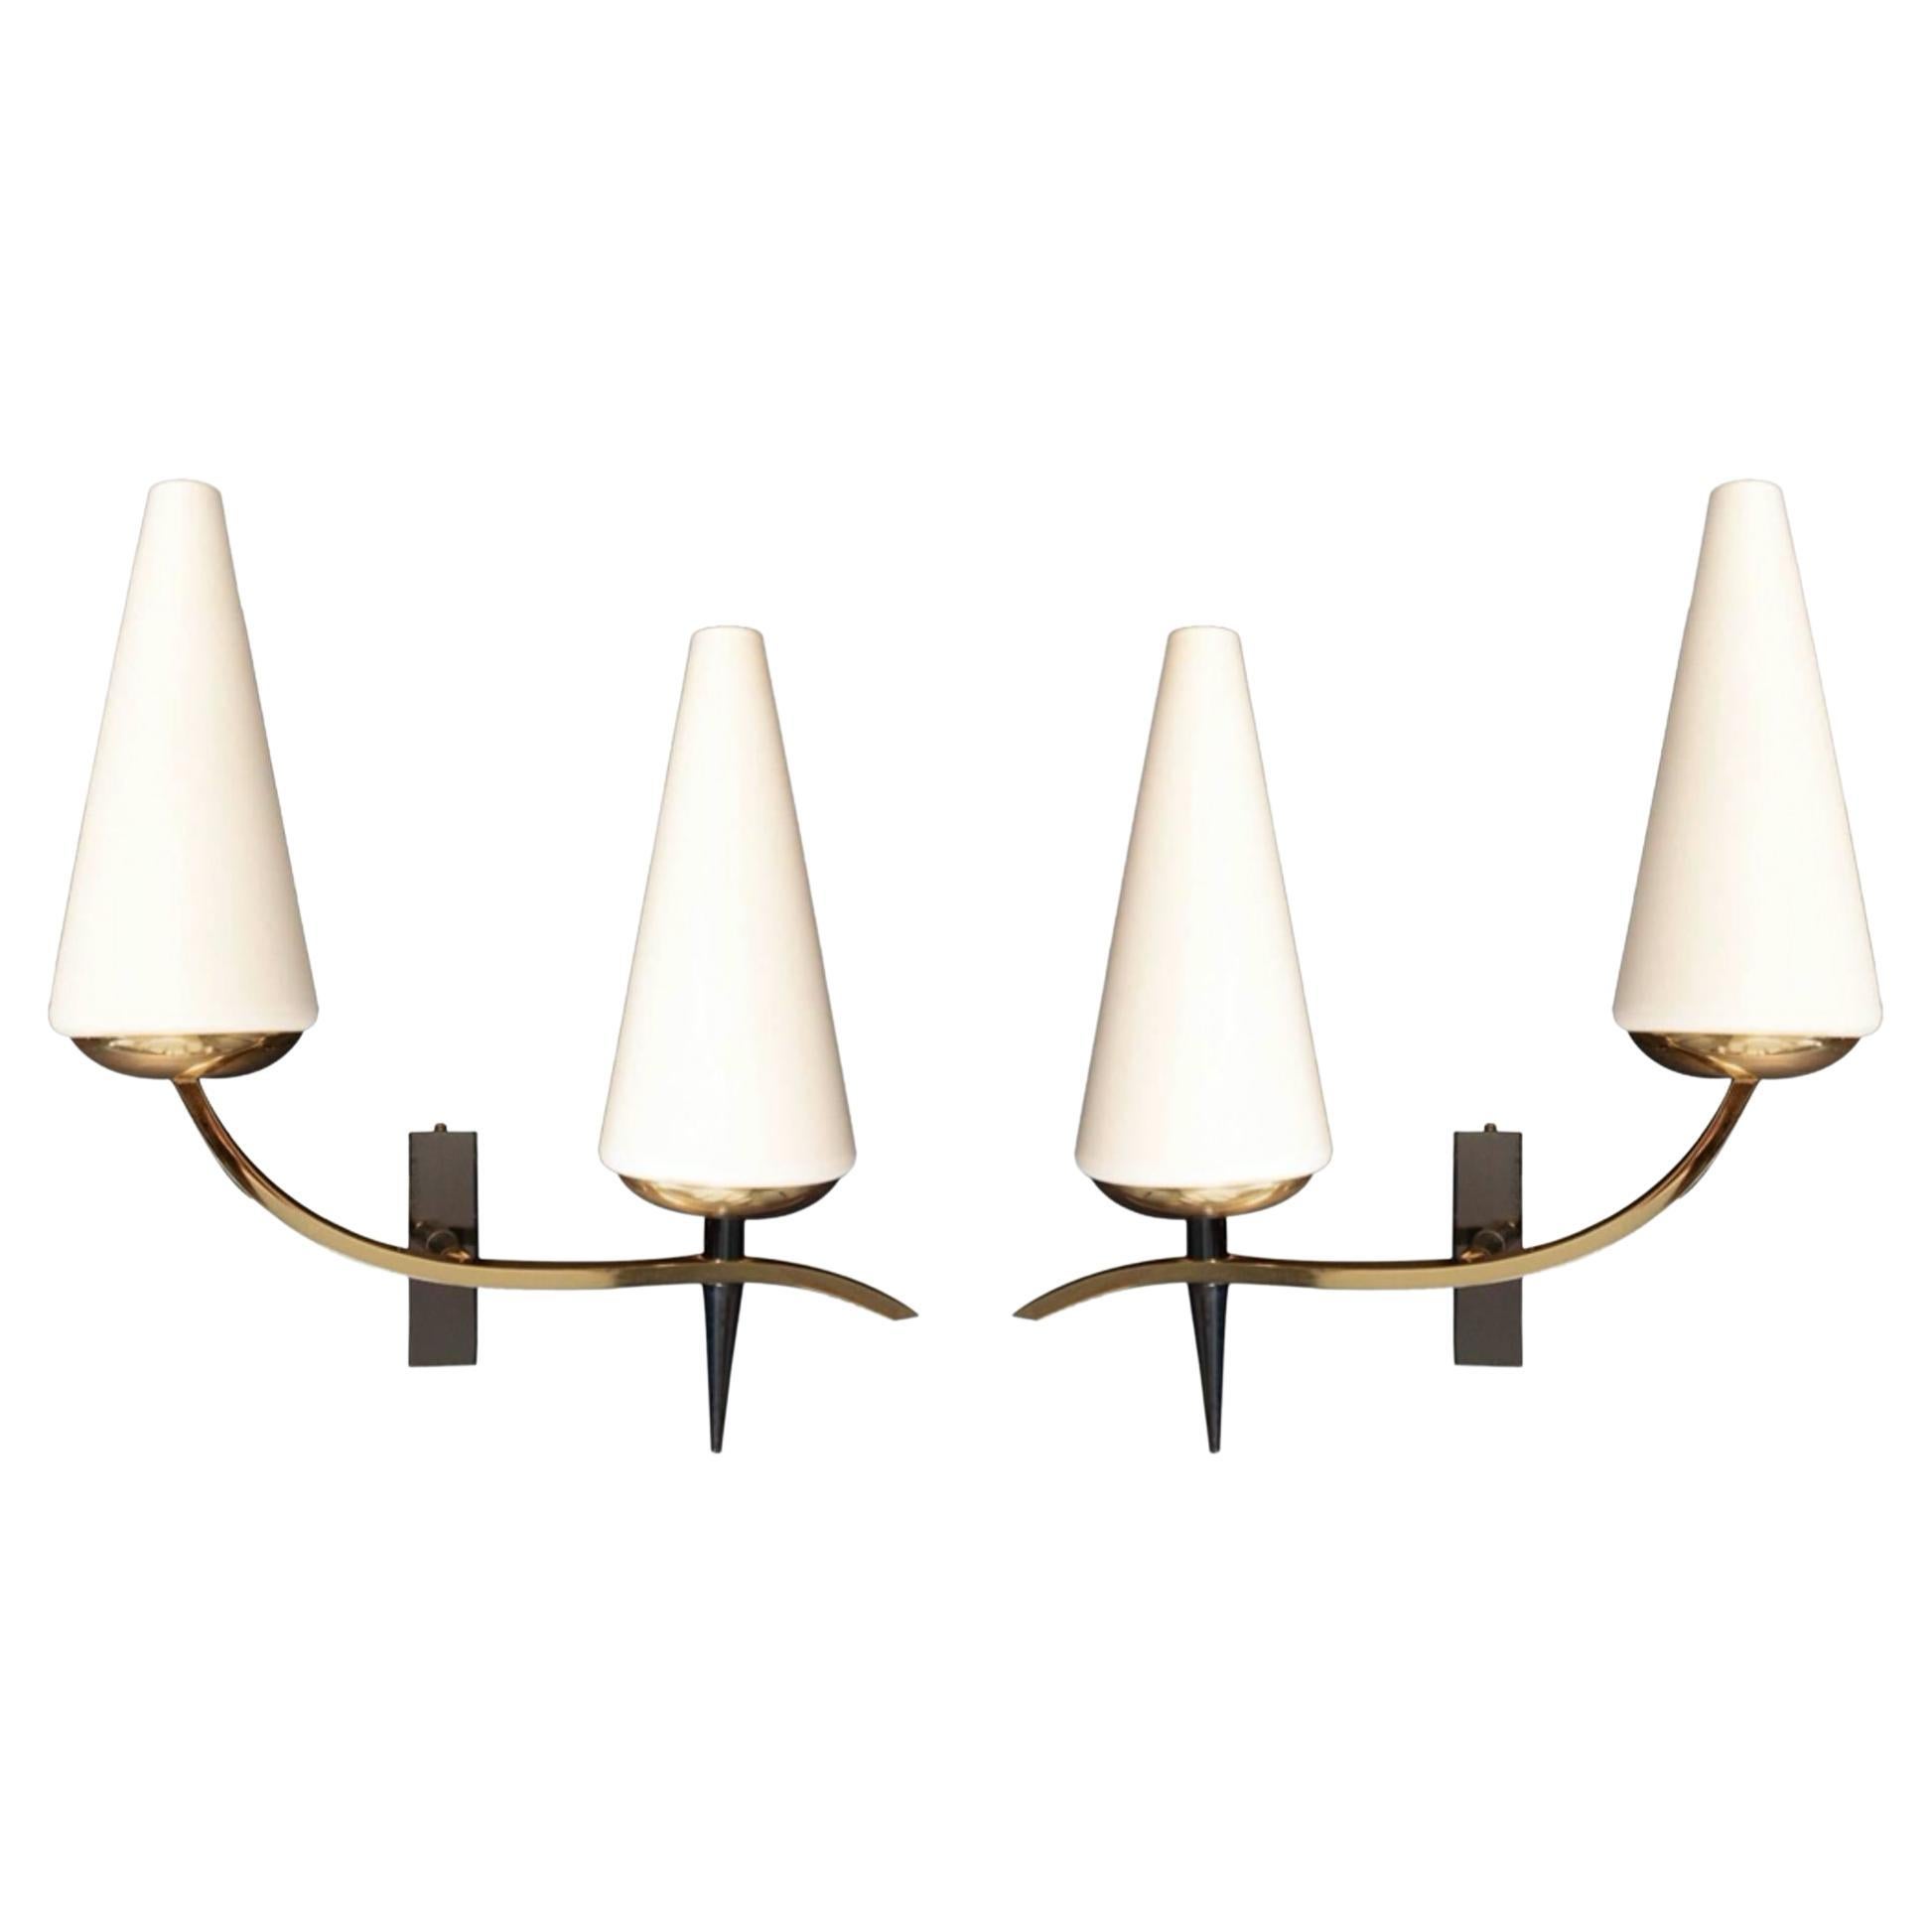 1950 Pair of Assymetrical Sconces by the Maison Arlus